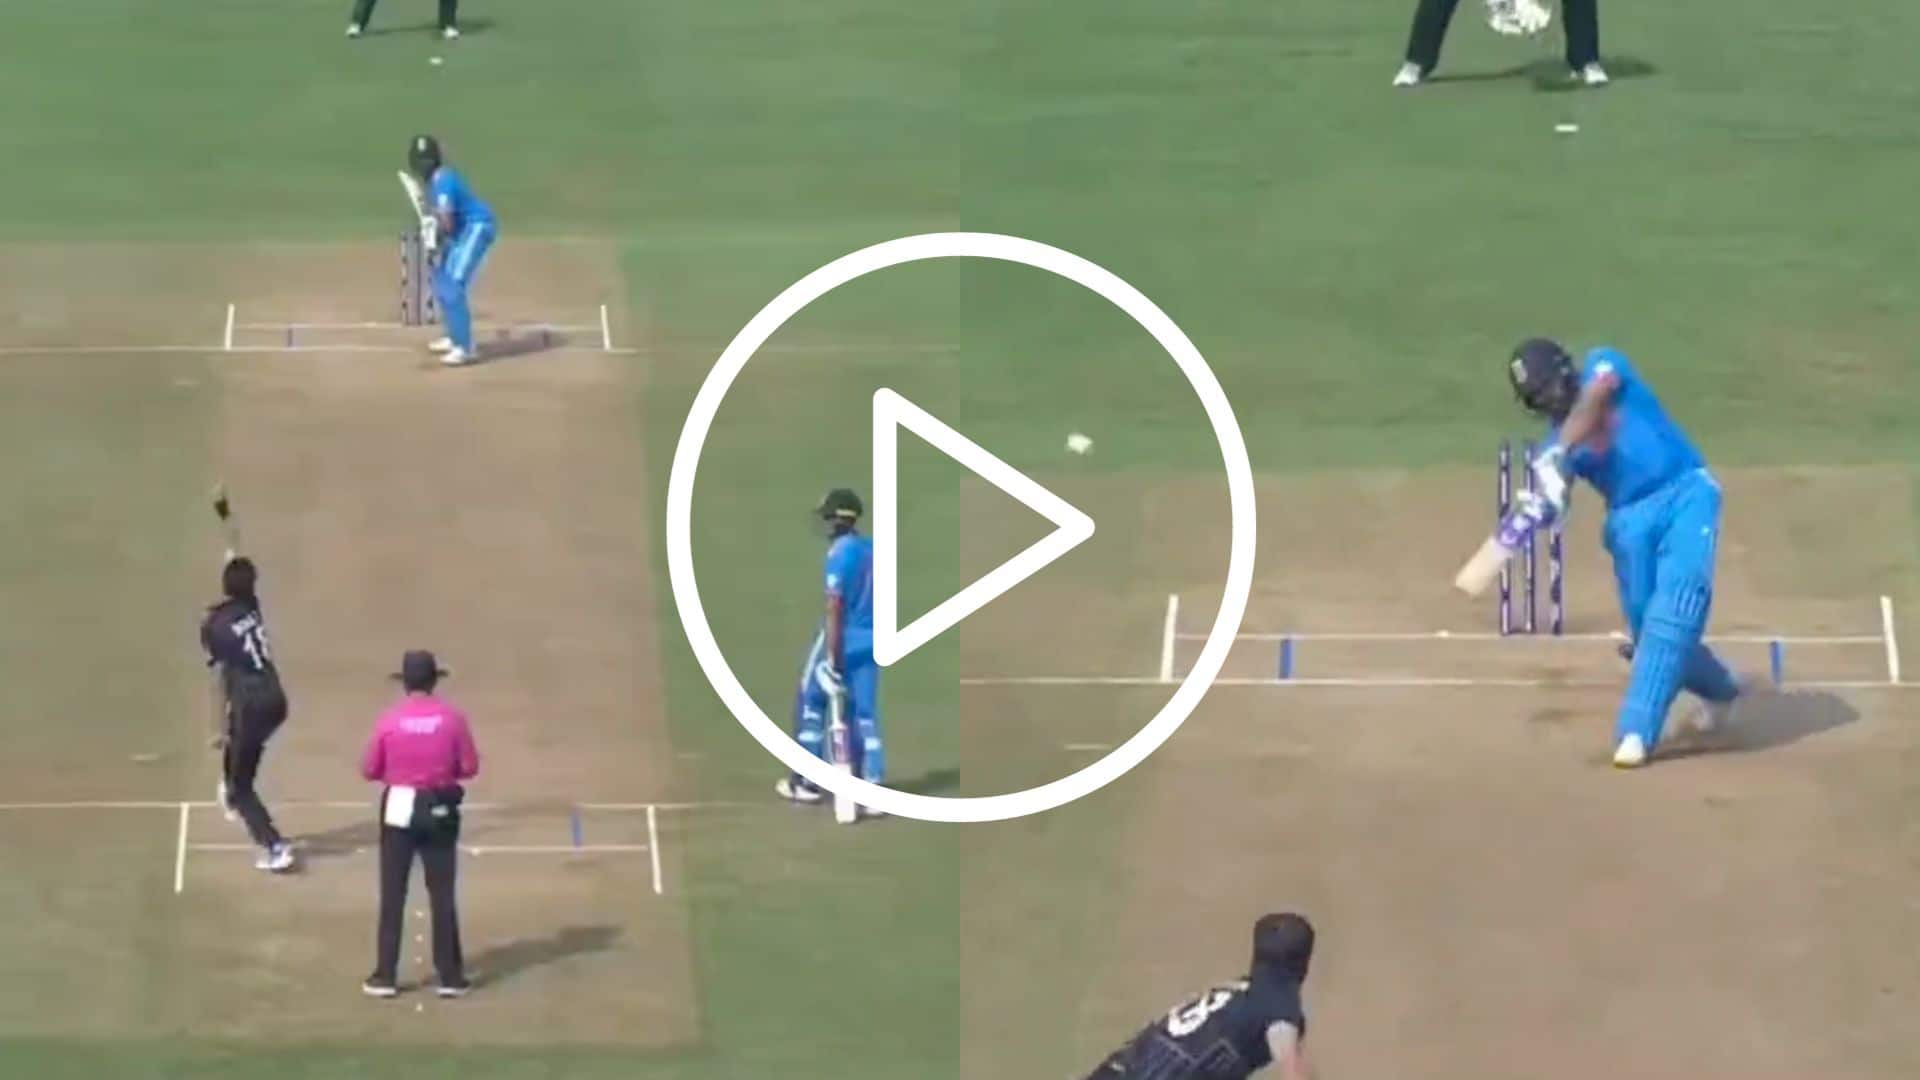 [Watch] Rohit Sharma 'Slaps' Trent Boult For 'Enormous' Six; Wankhede Goes Berserk